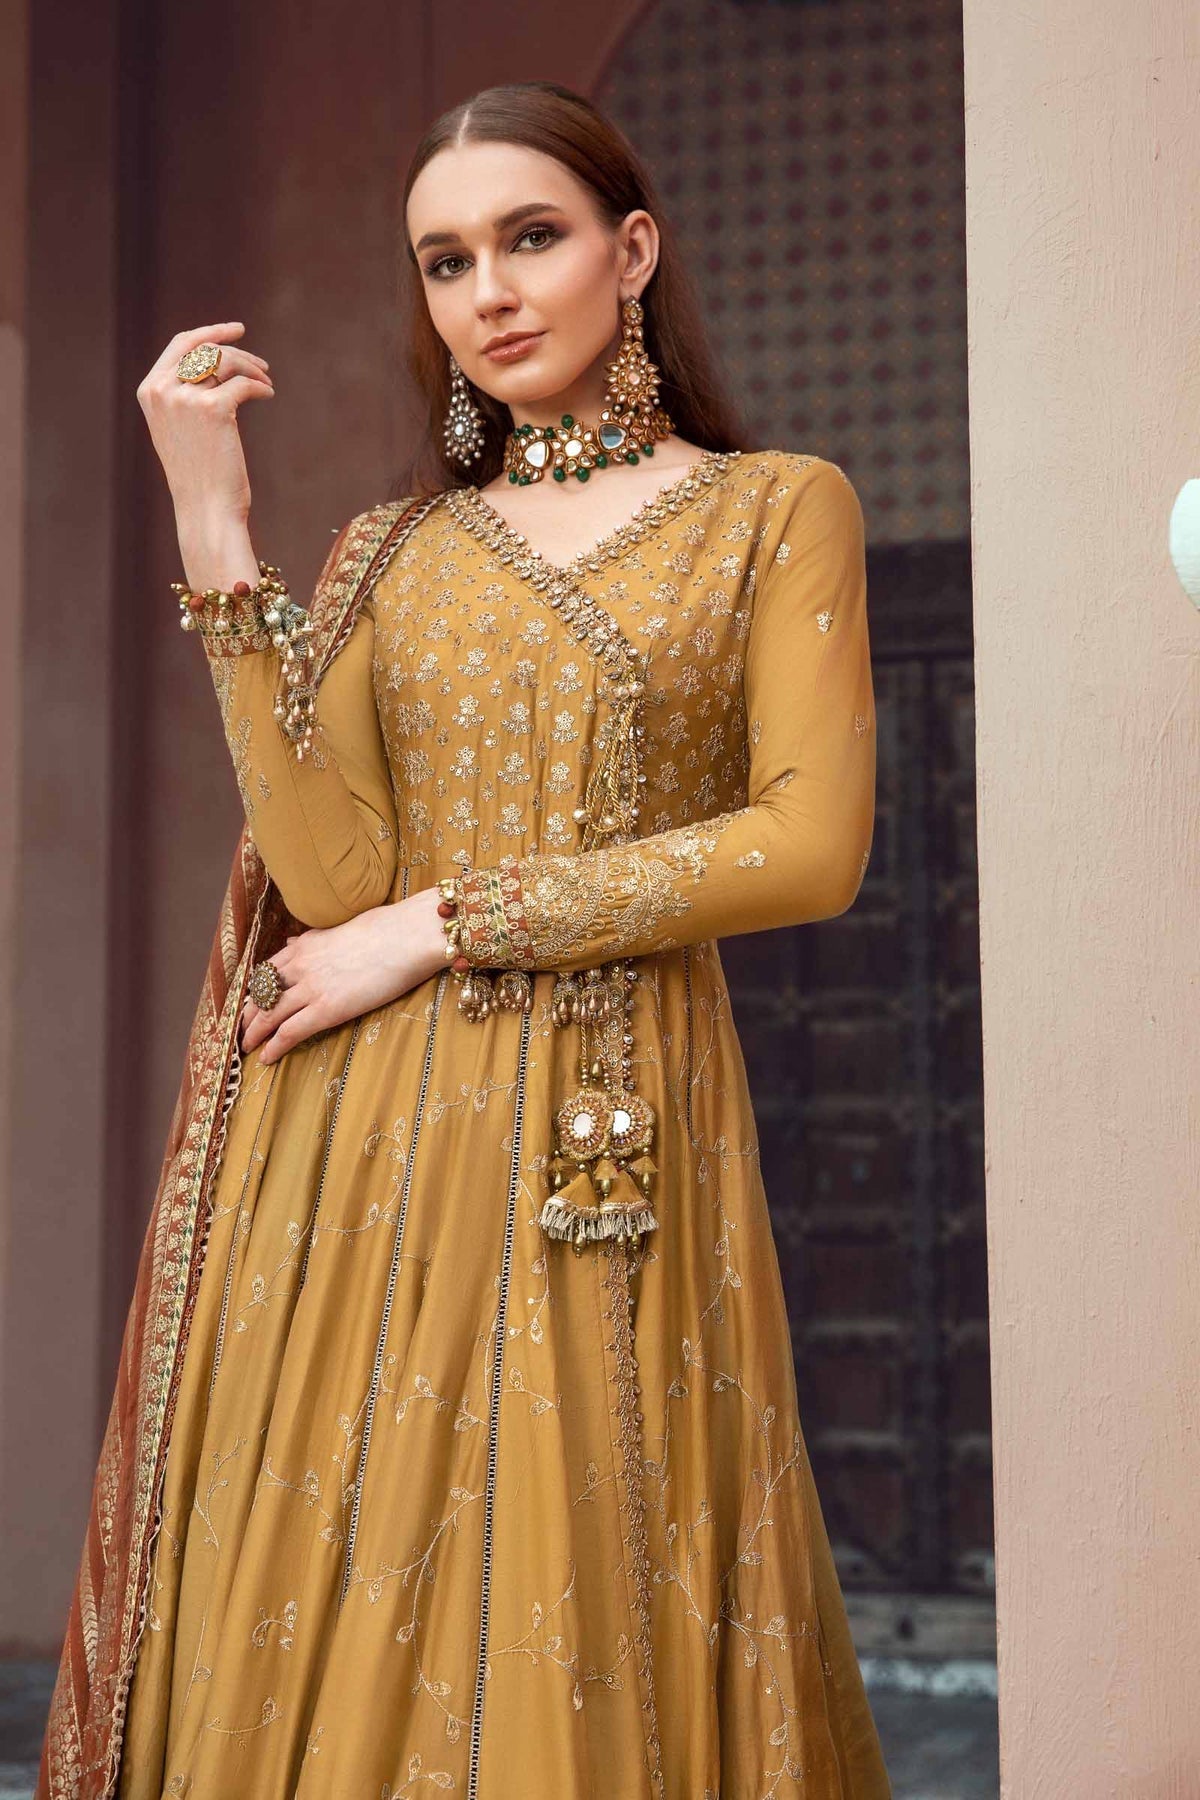 Maria. B 03 Piece Unstitched Embroidered Cotton Satin Suit - CST-702 Mustard